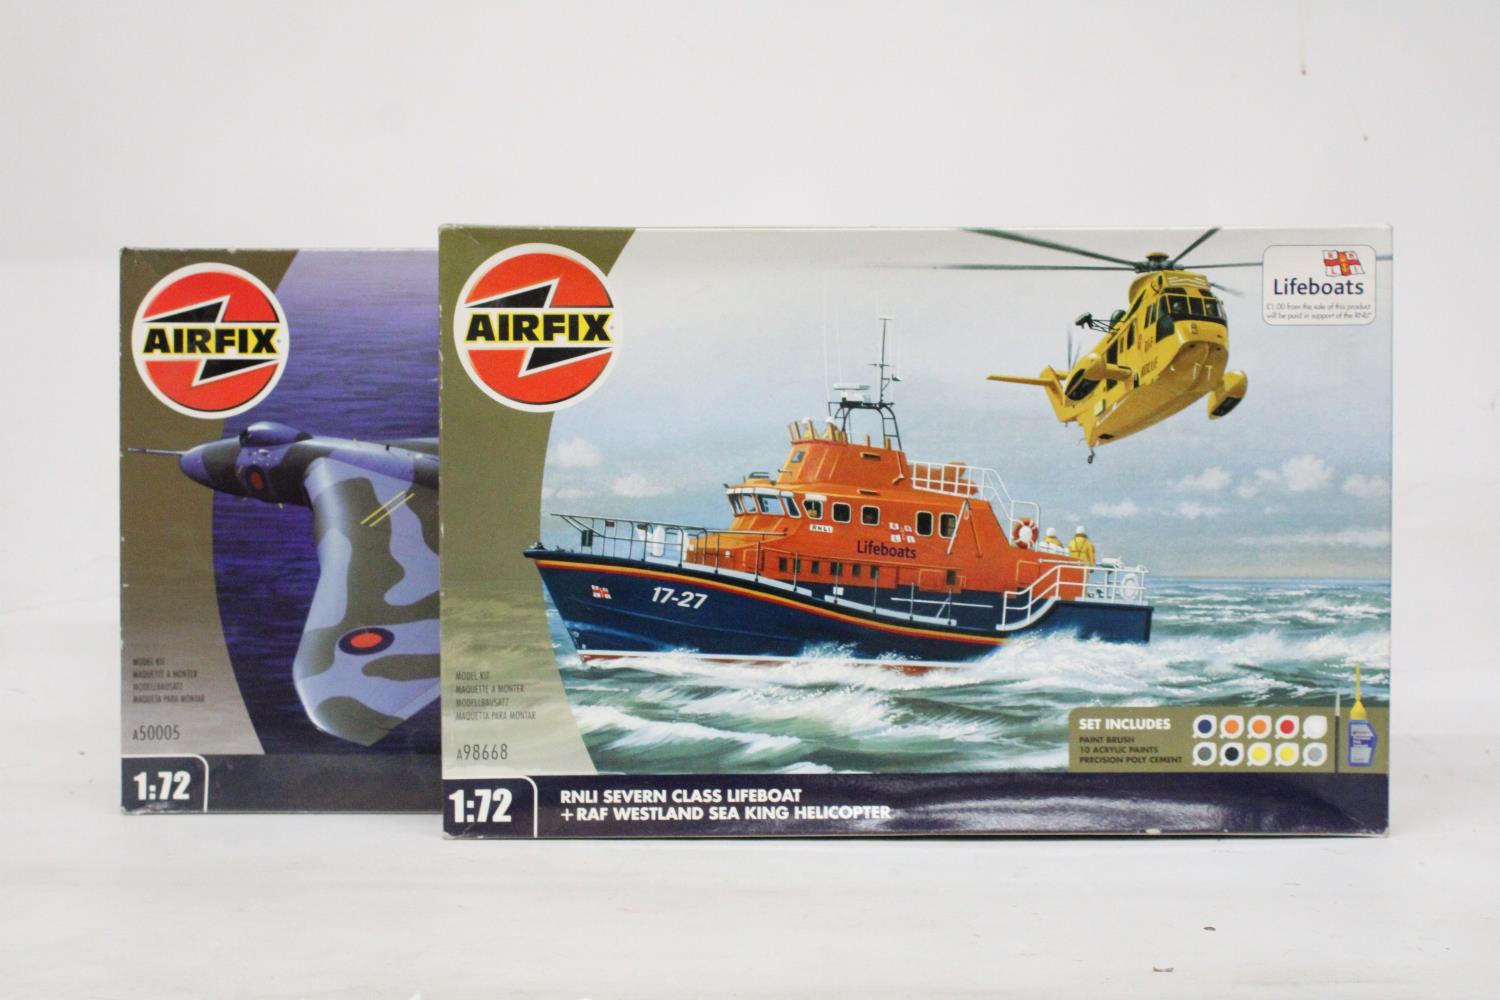 TWO LARGE UNOPENED AIRFIX KITS TO INCLUDE AN AVRO VULCAN B MK2 FALKLANDS WAR 25 YEARS AND A RNLI